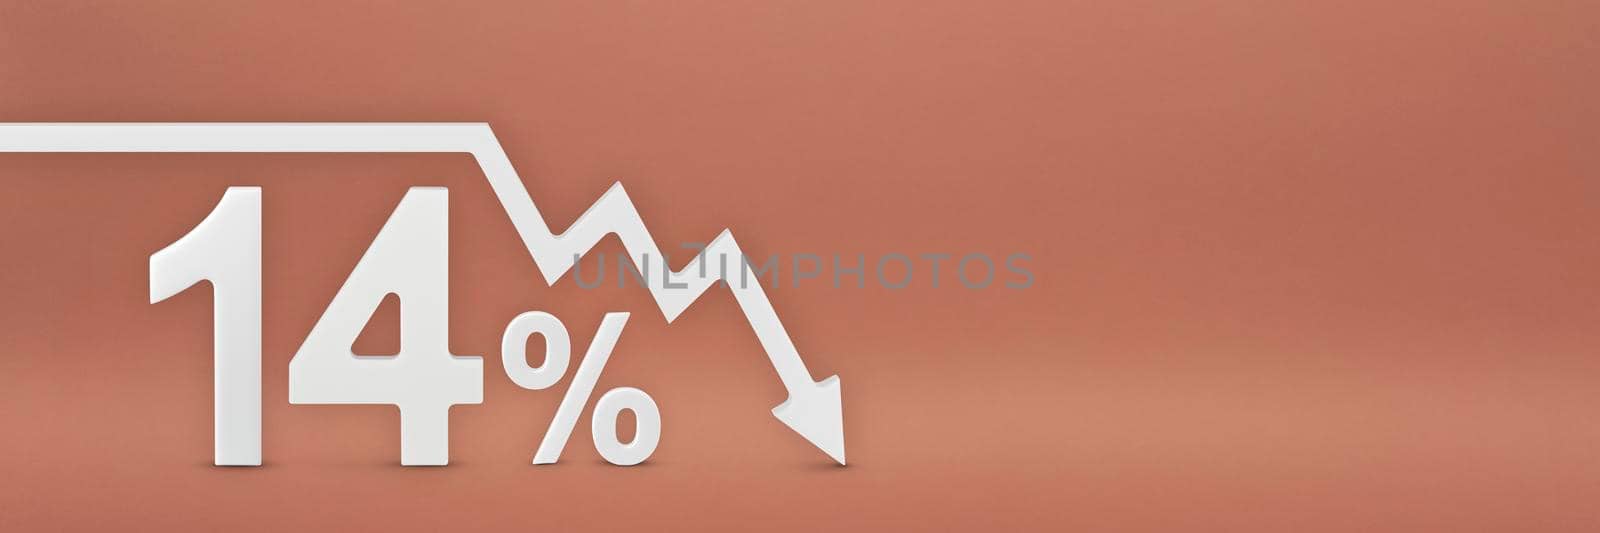 fourteen percent, the arrow on the graph is pointing down. Stock market crash, bear market, inflation. Economic collapse, collapse of stocks. 3d banner, 14 percent discount sign on a red background